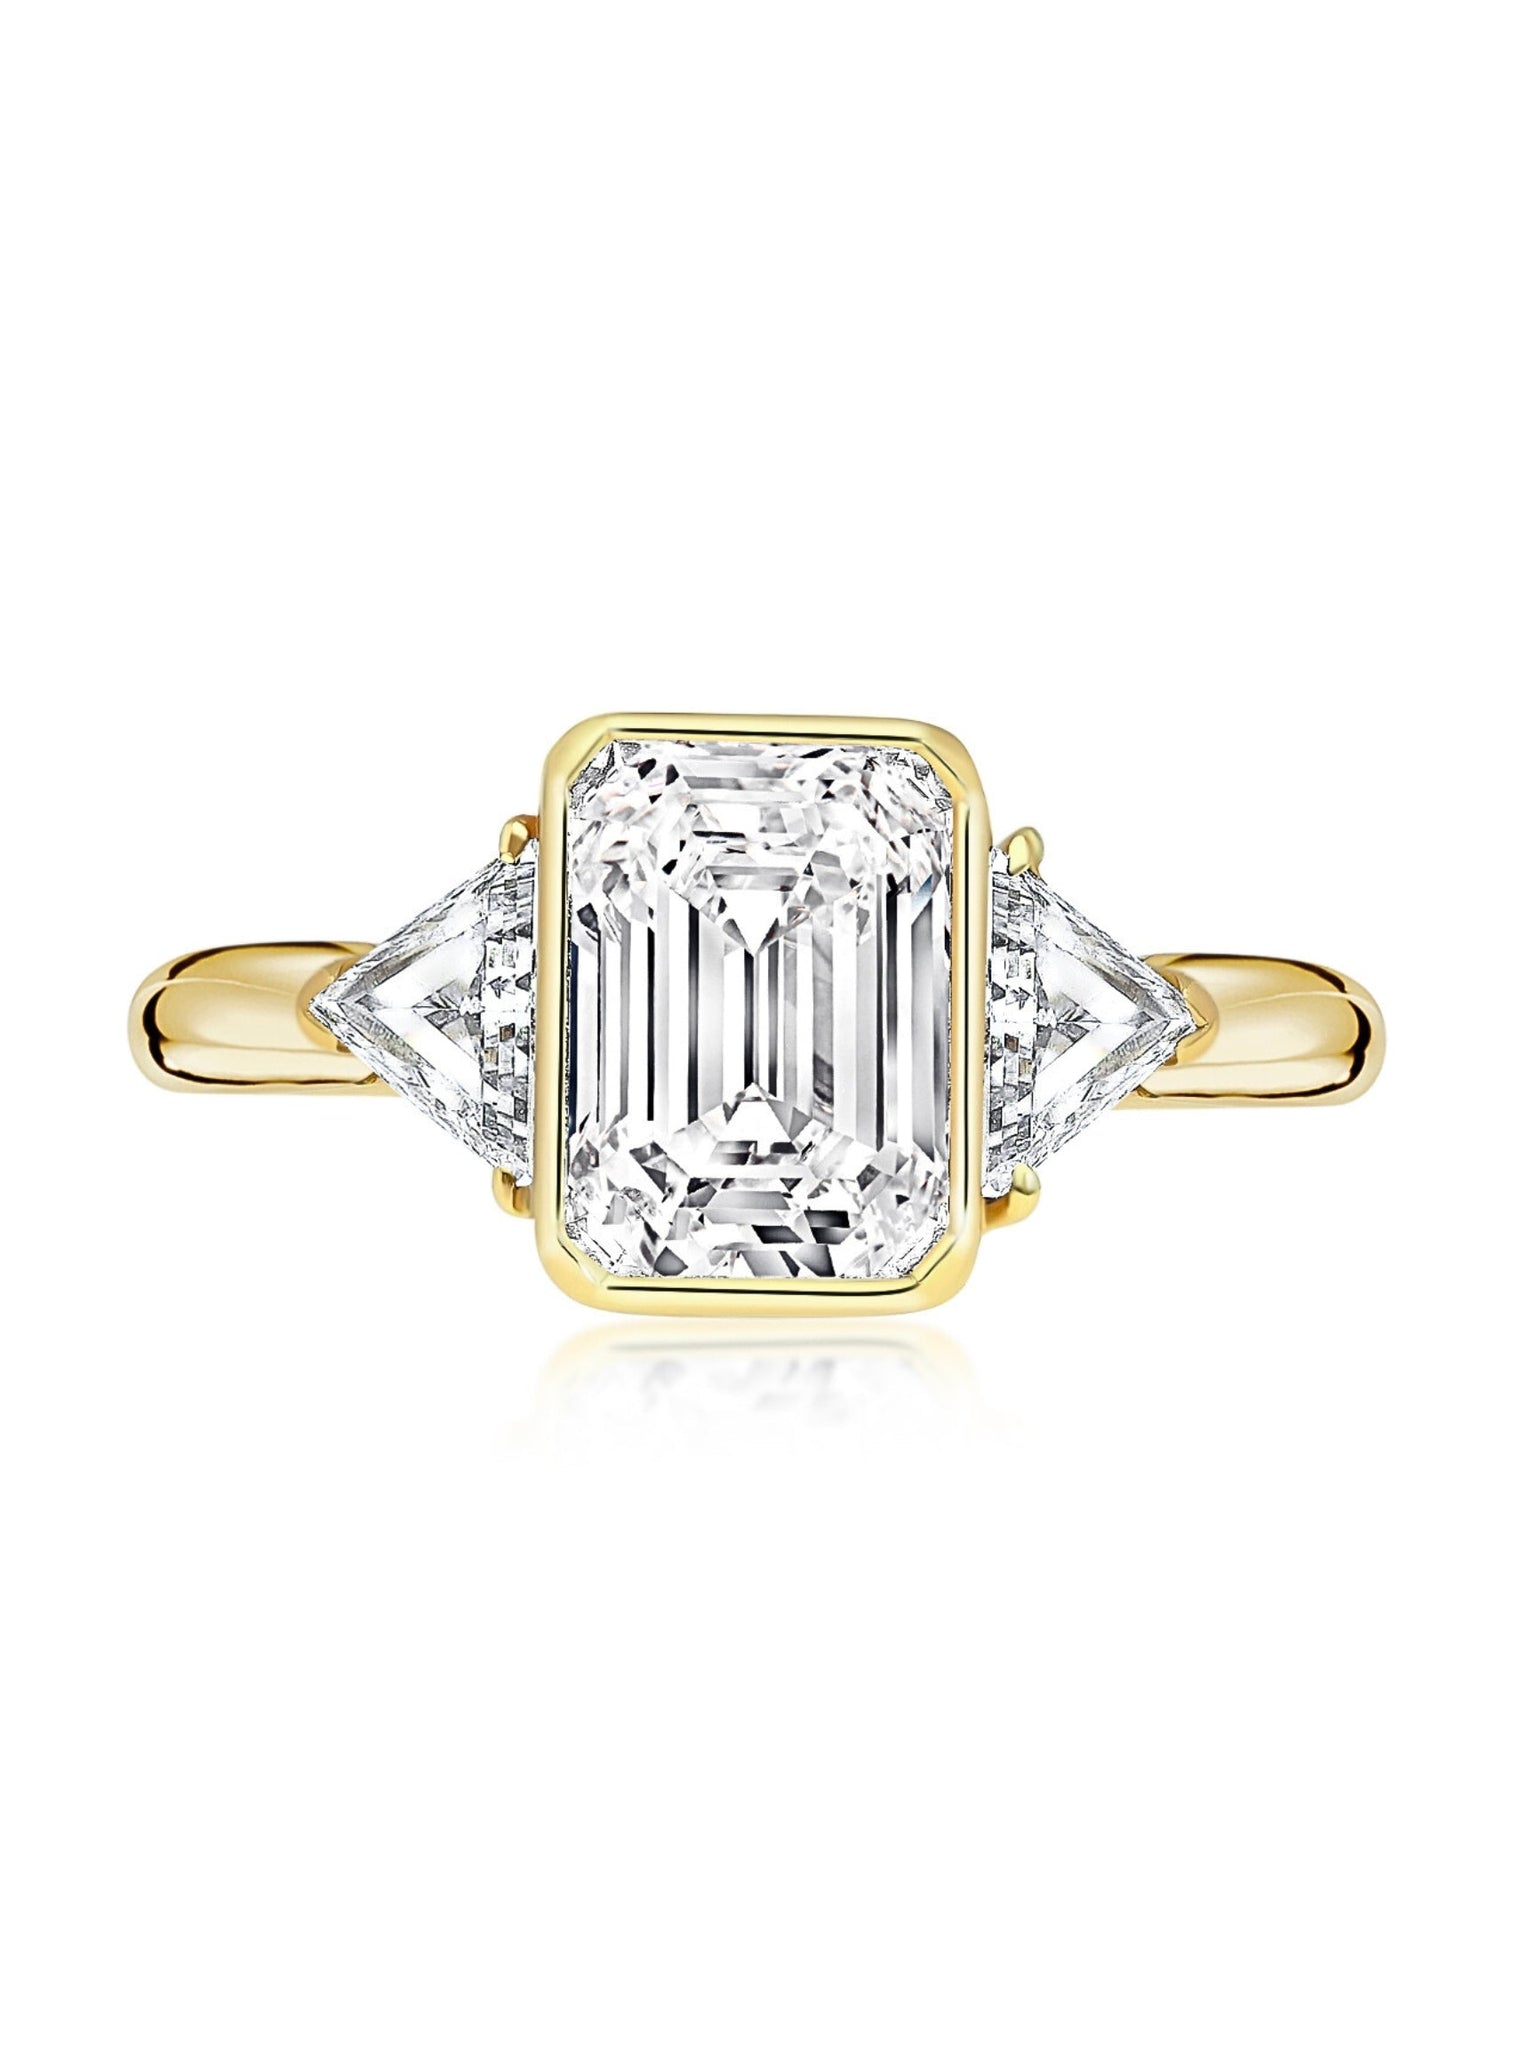 Boucheron Signed Ring With Bezel Set GIA Certified 2.09 Carat Emerald Cut E/SI1 Diamond and Trillion Side Stones